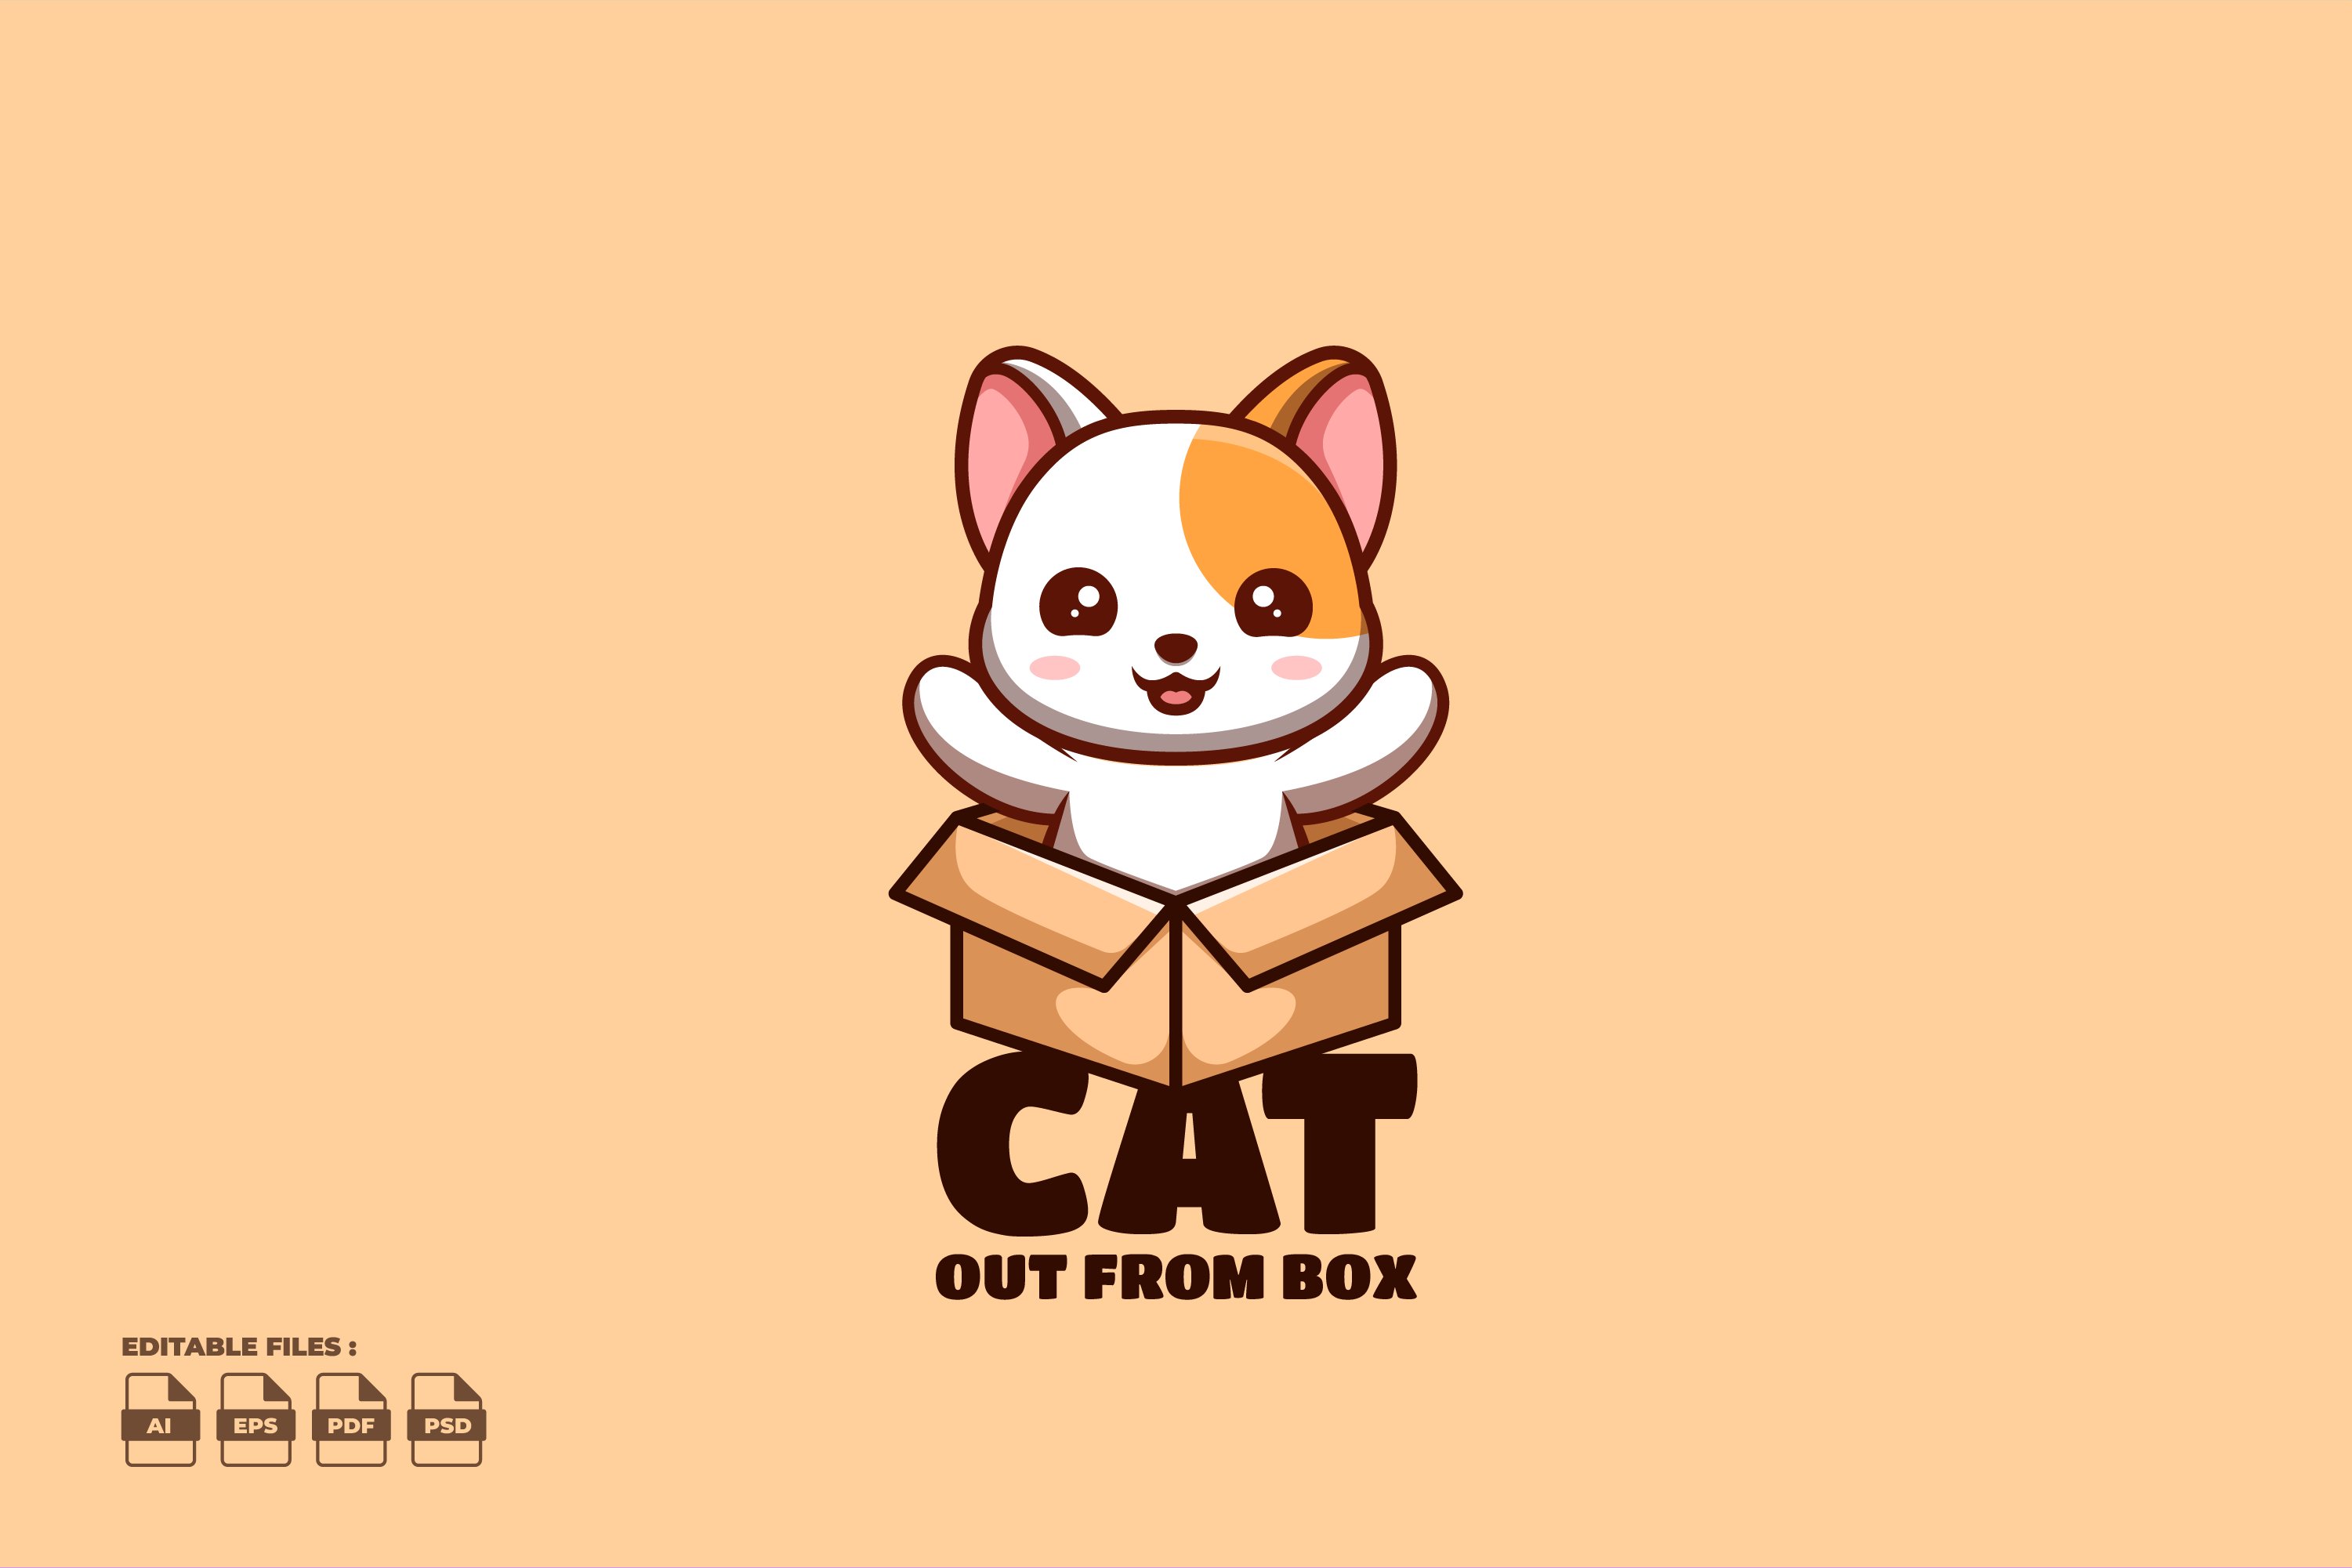 Out From Box White Cat Cute Mascot L cover image.